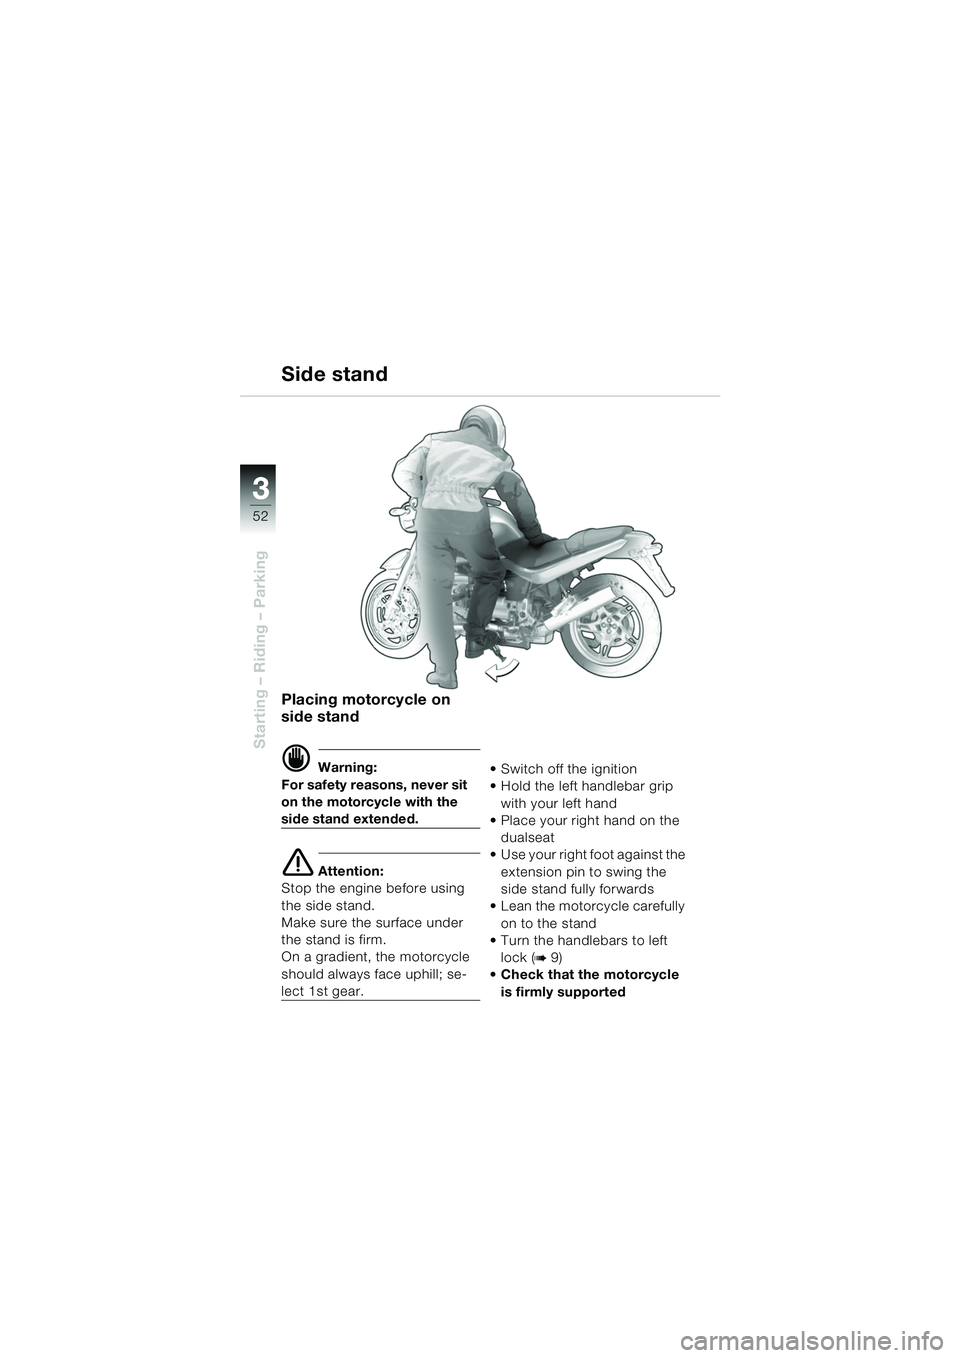 BMW MOTORRAD R 850 R 2004  Riders Manual (in English) 33
52
Starting – Riding – Parking
Placing motorcycle on 
side stand
d Warning:
For safety reasons, never sit 
on the motorcycle with the 
side stand extended.
e Attention:
Stop the engine before u